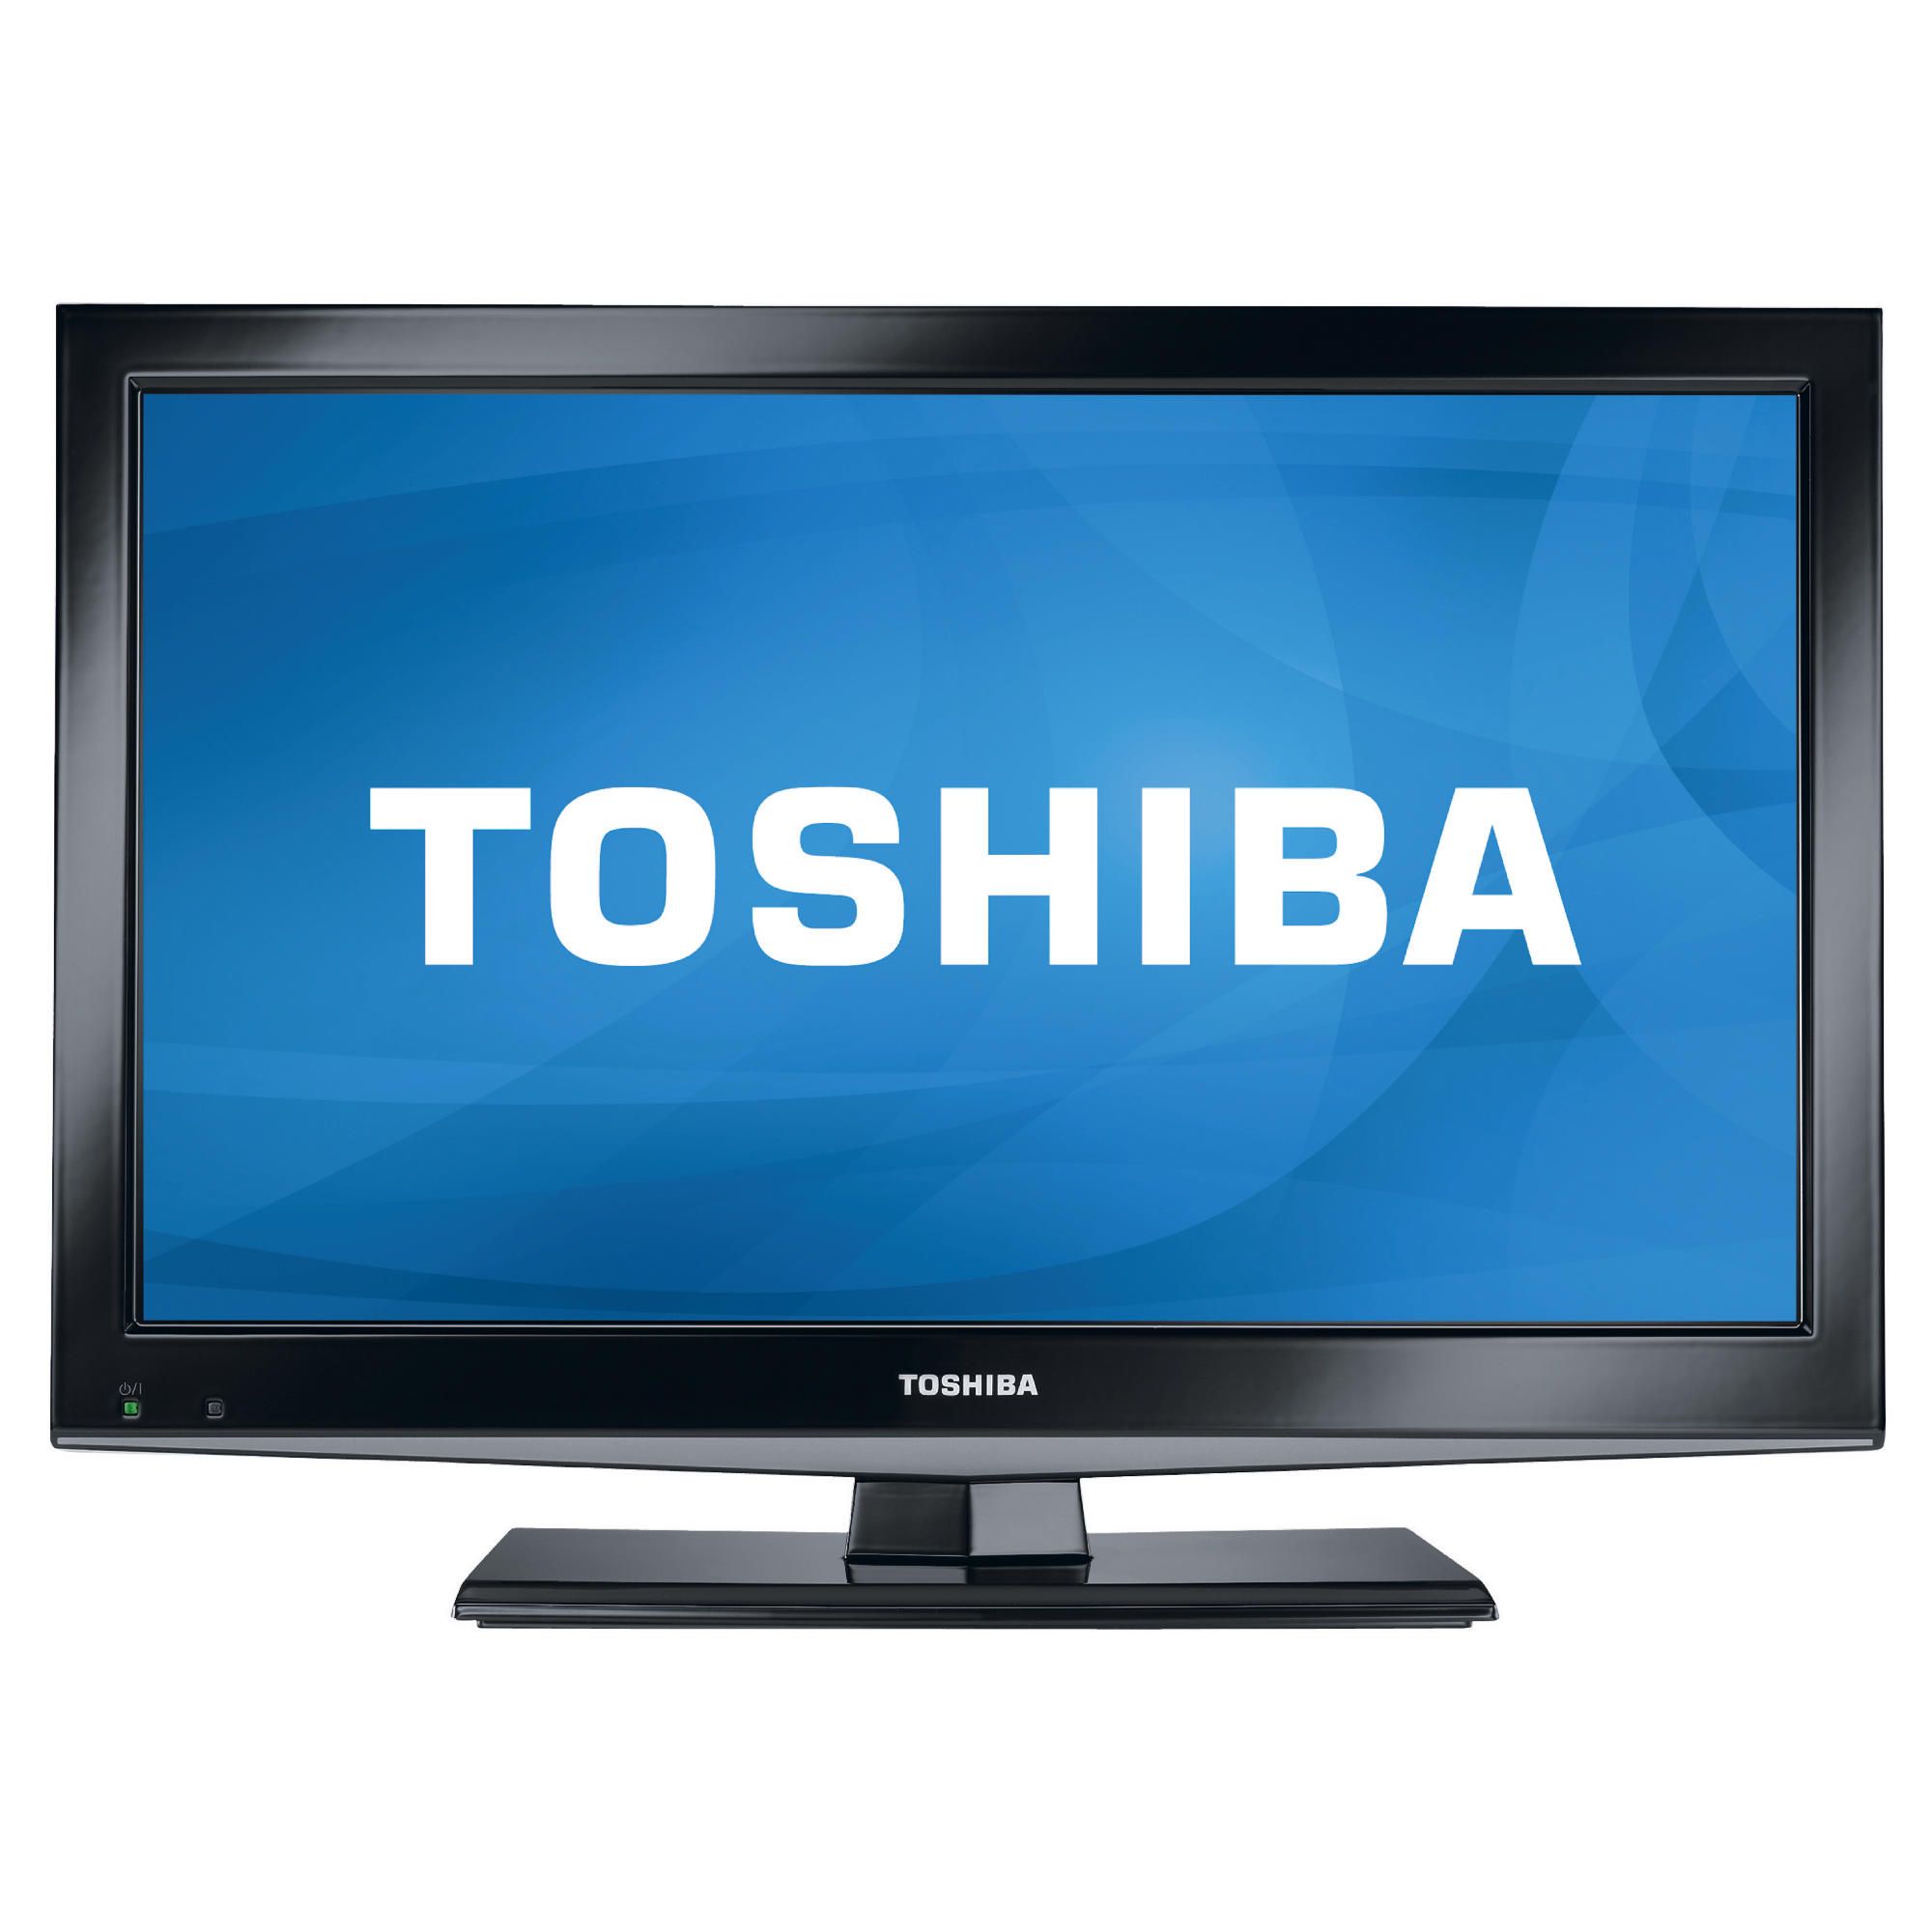 Toshiba 19BL502B 19 inch HD Ready LED TV with Freeview